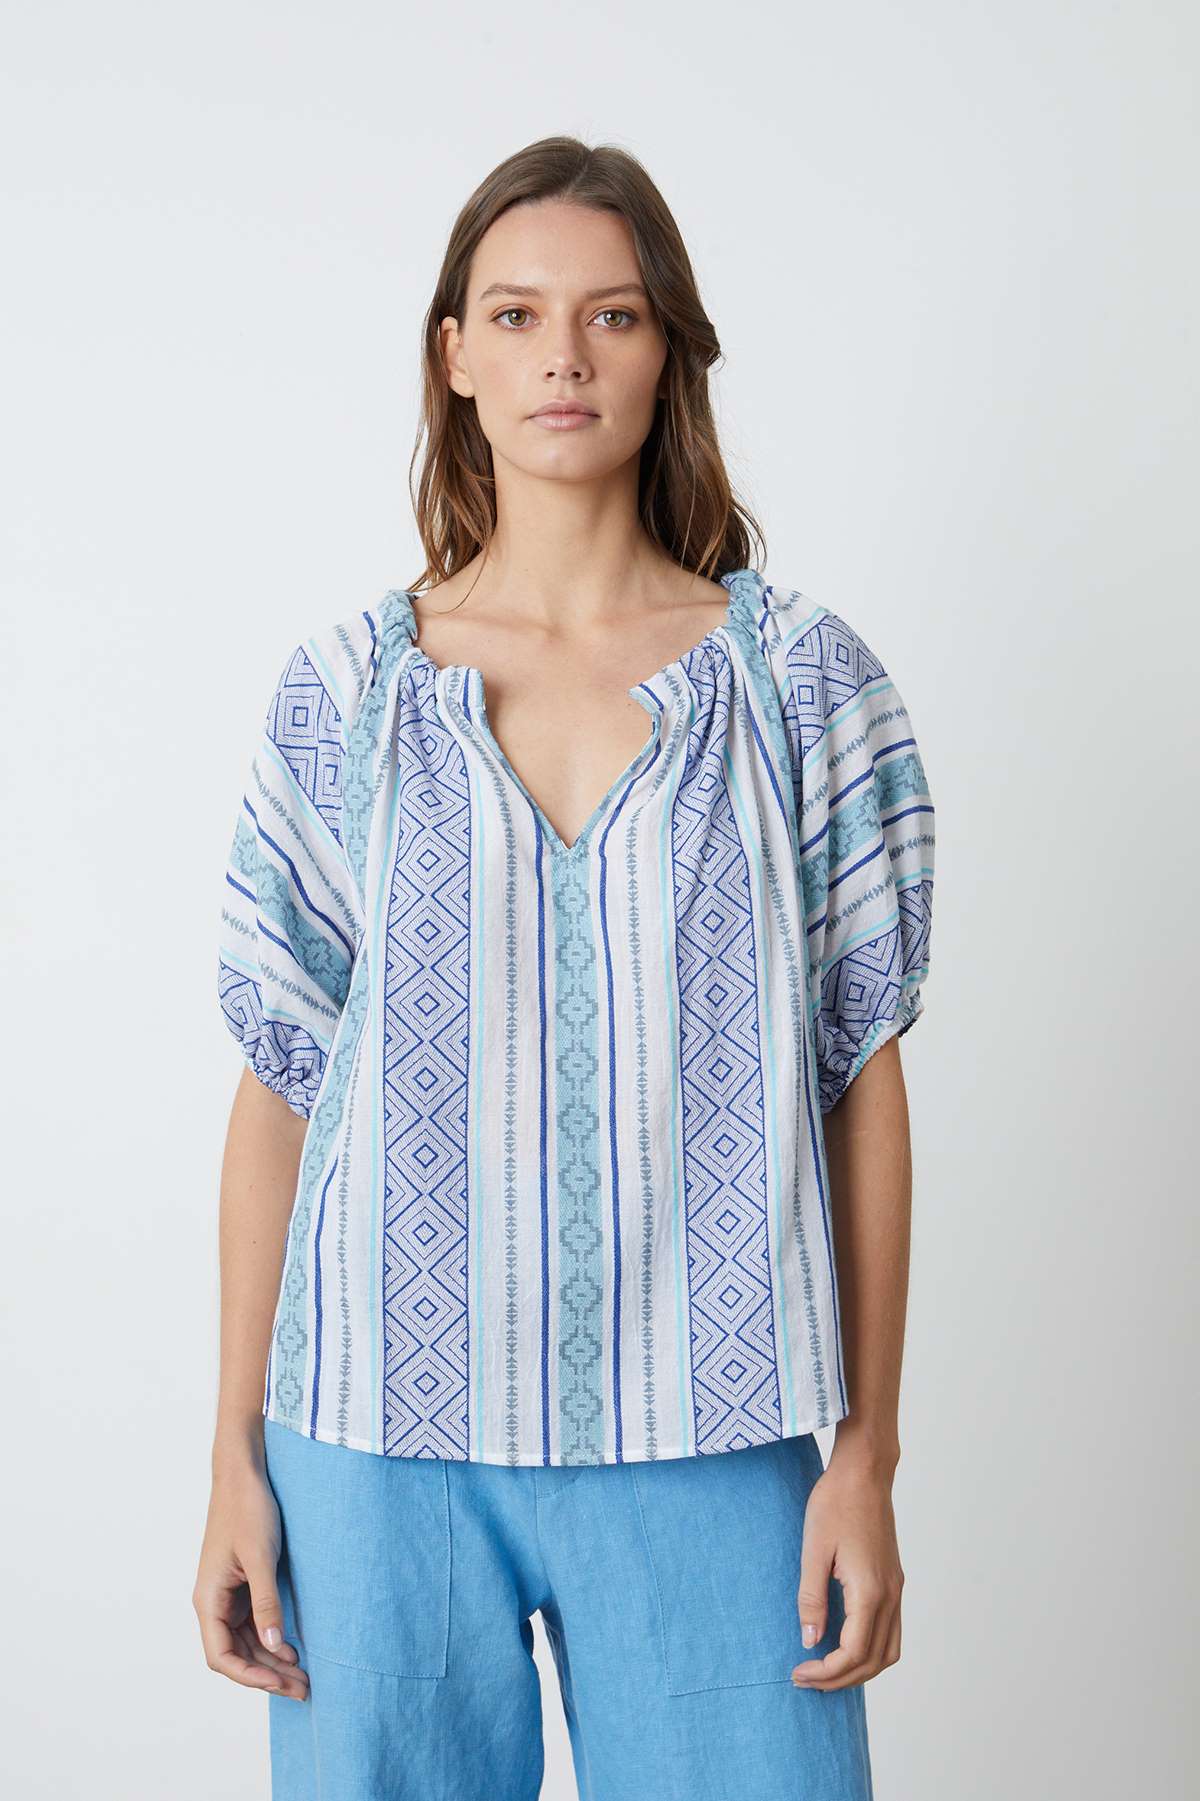 Velvet by Graham and Spencer Kimmy Top in Blue Jacquard – Shop Helena's